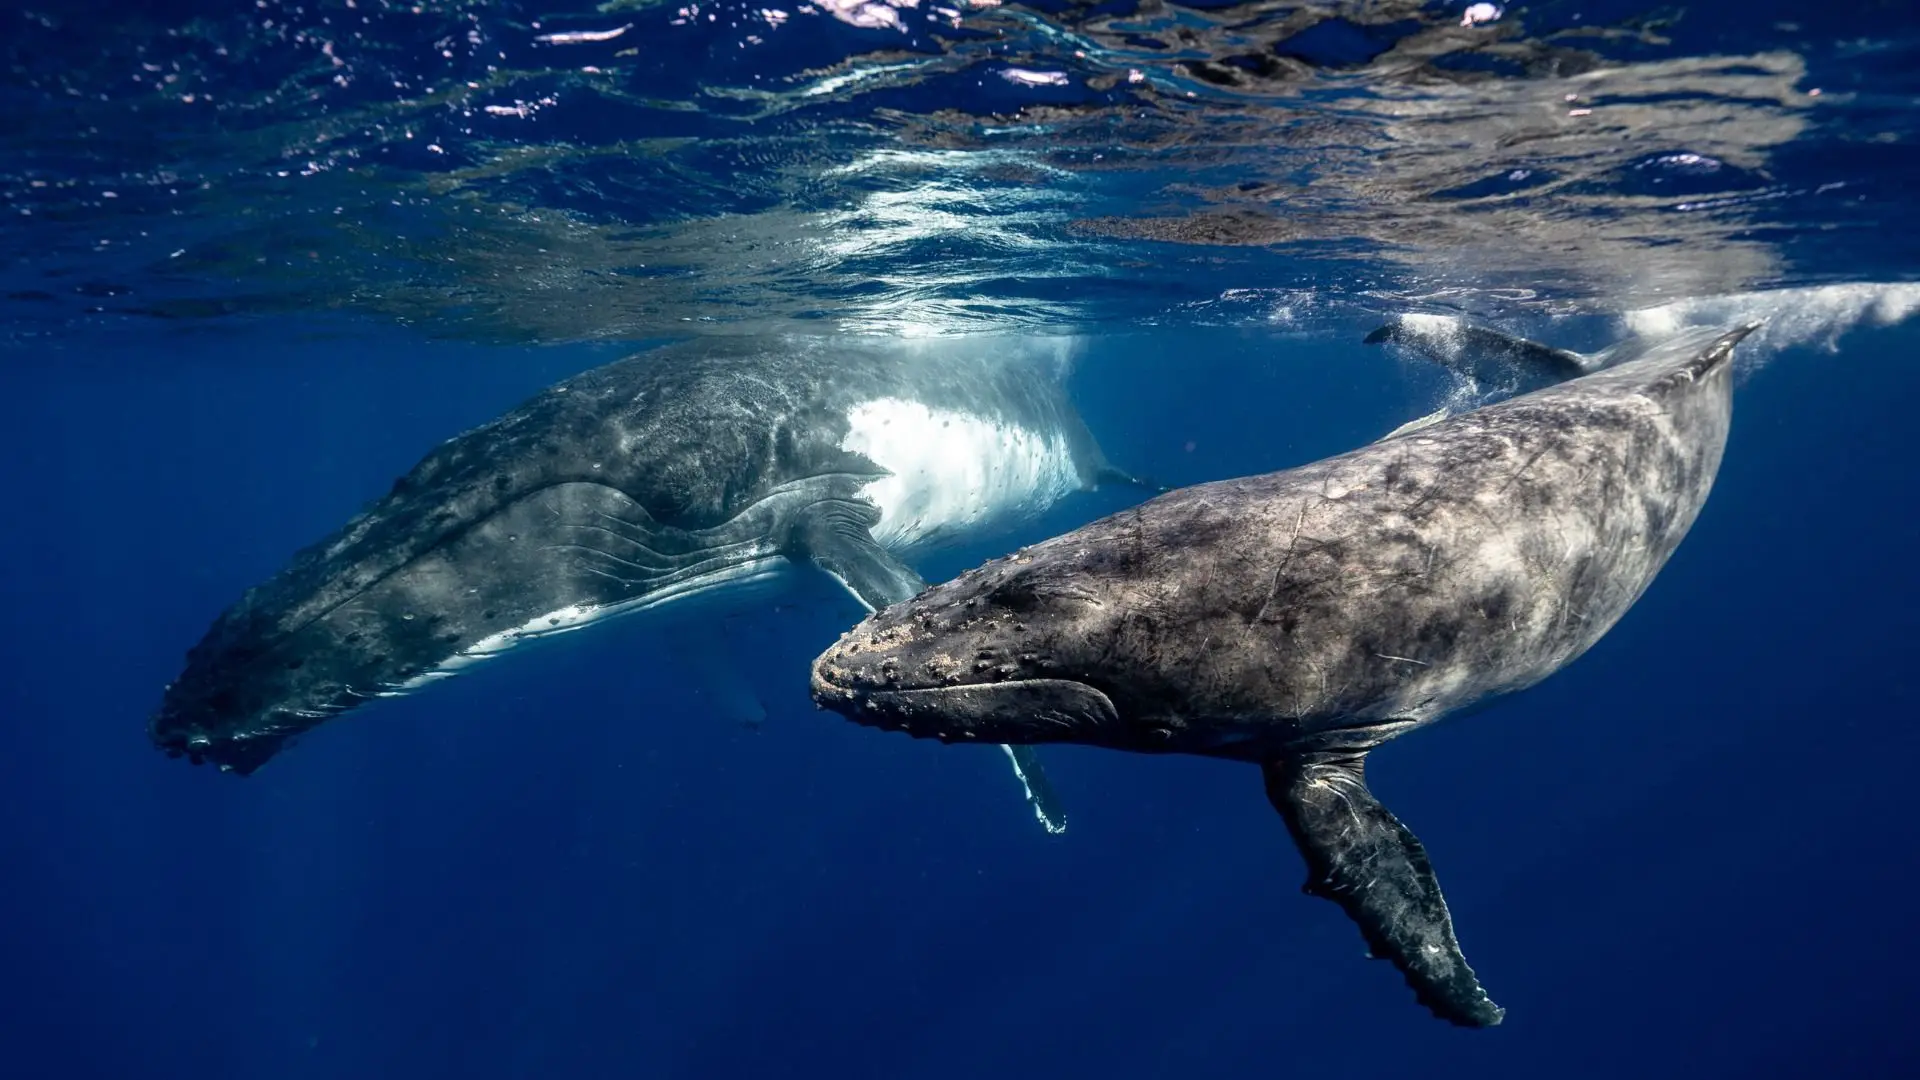 Can Reinforcement Learning Save Whales Dying From Ship Strikes? | 1